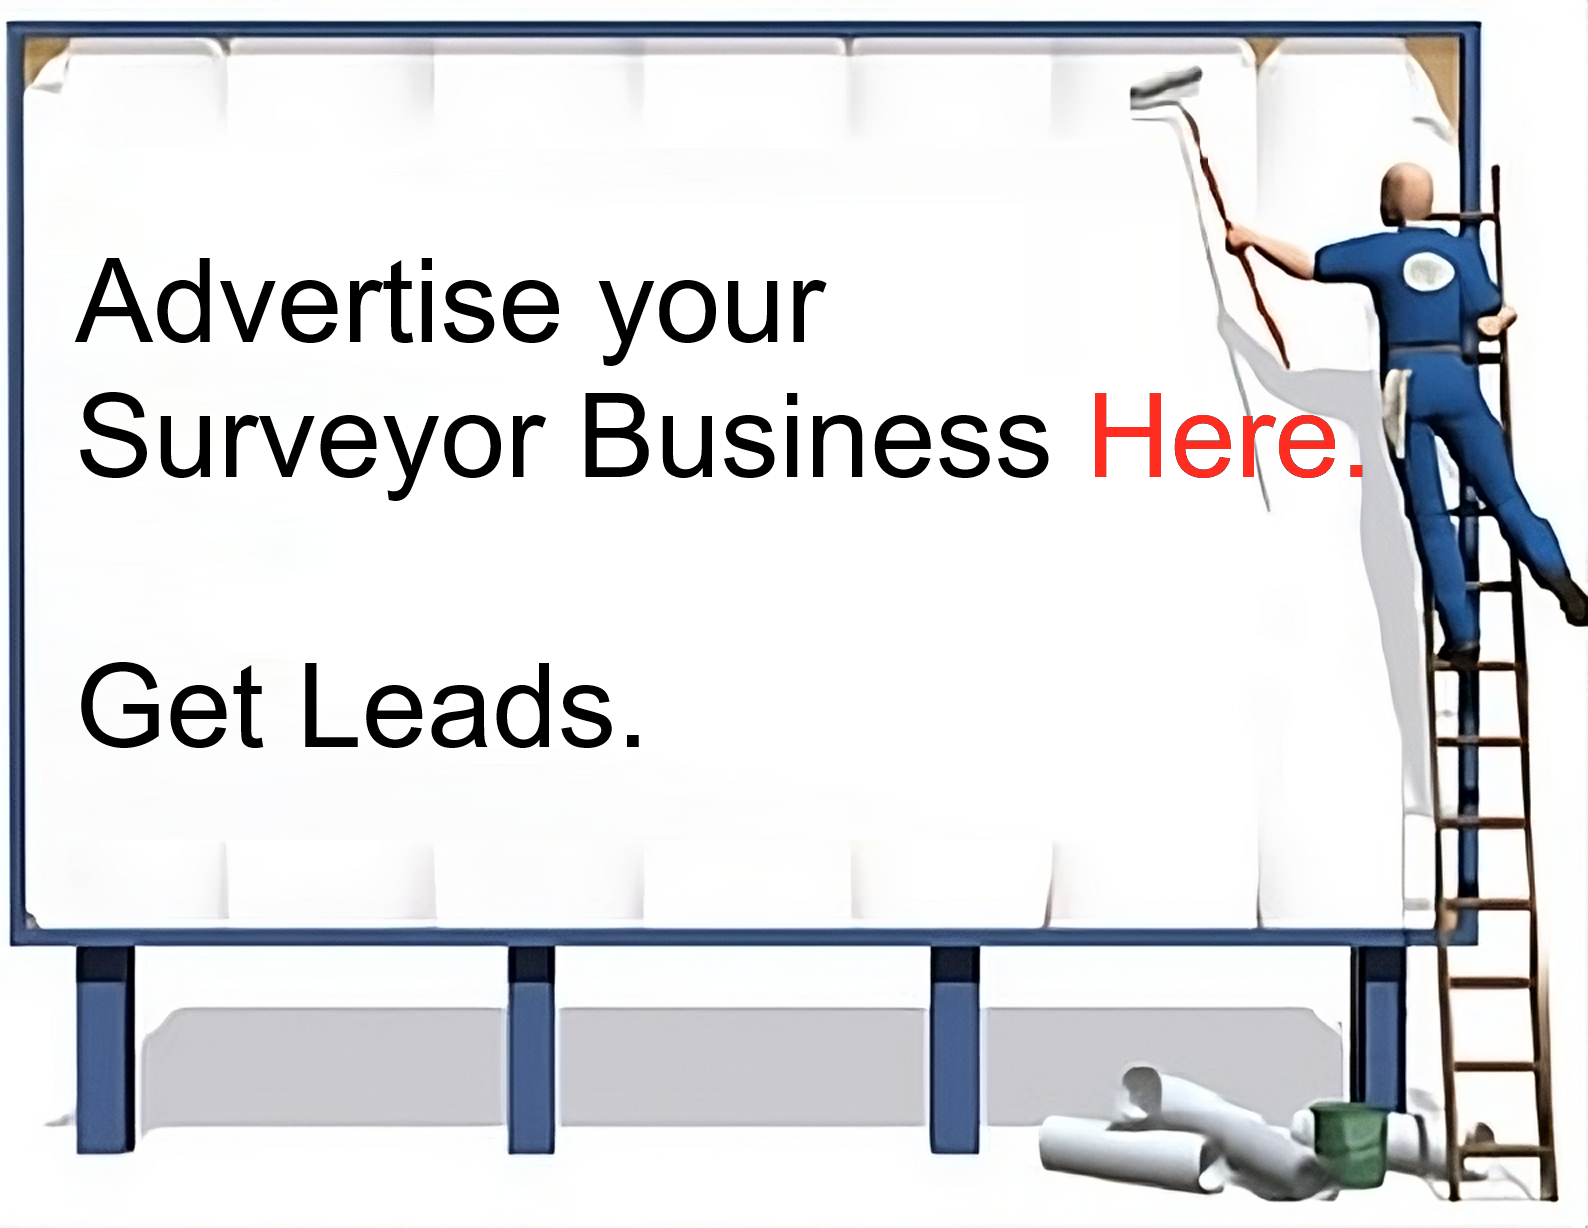 Surveyors, advertise your business on Boat-Alert Blog - Get Leads in your City!